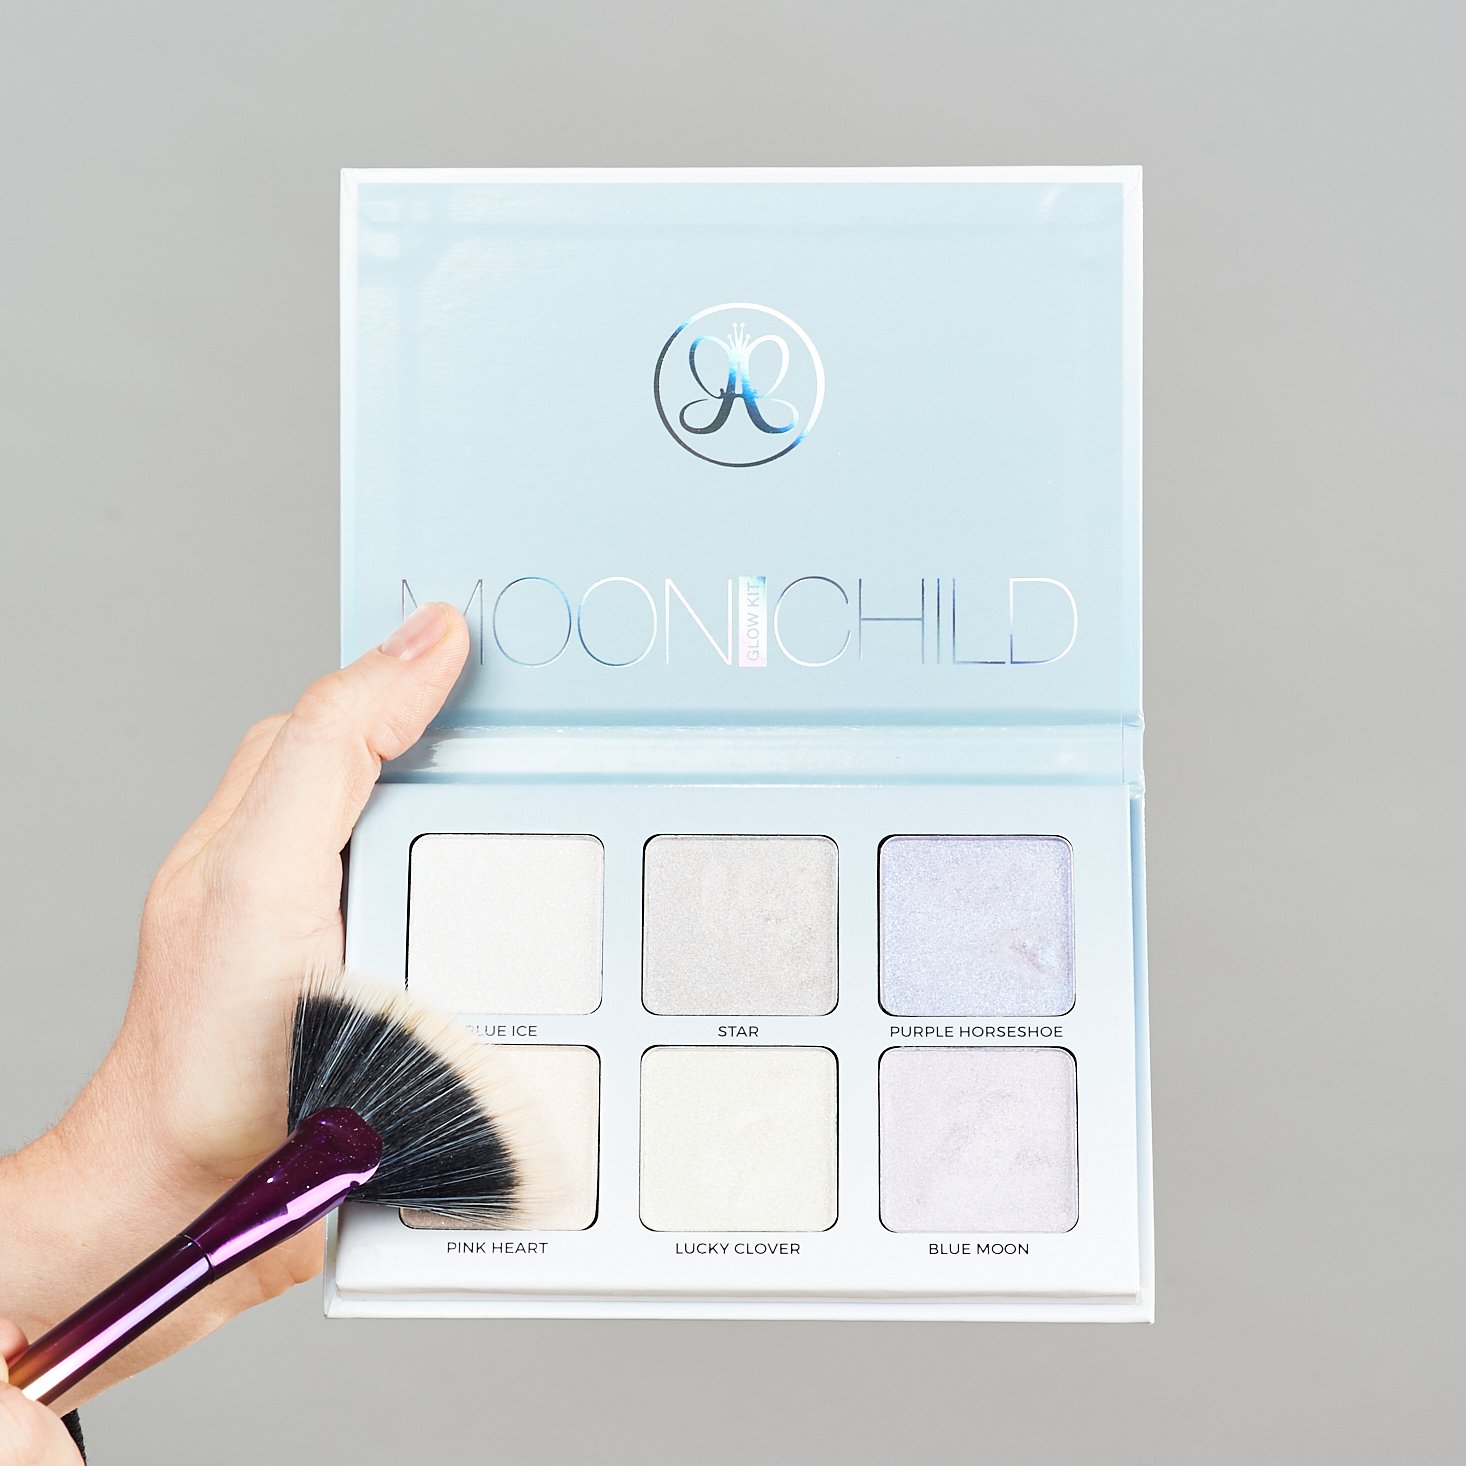 Moonchild Glow Kit from Anatasia Beverly Hills with brush pointing to Pink Heart